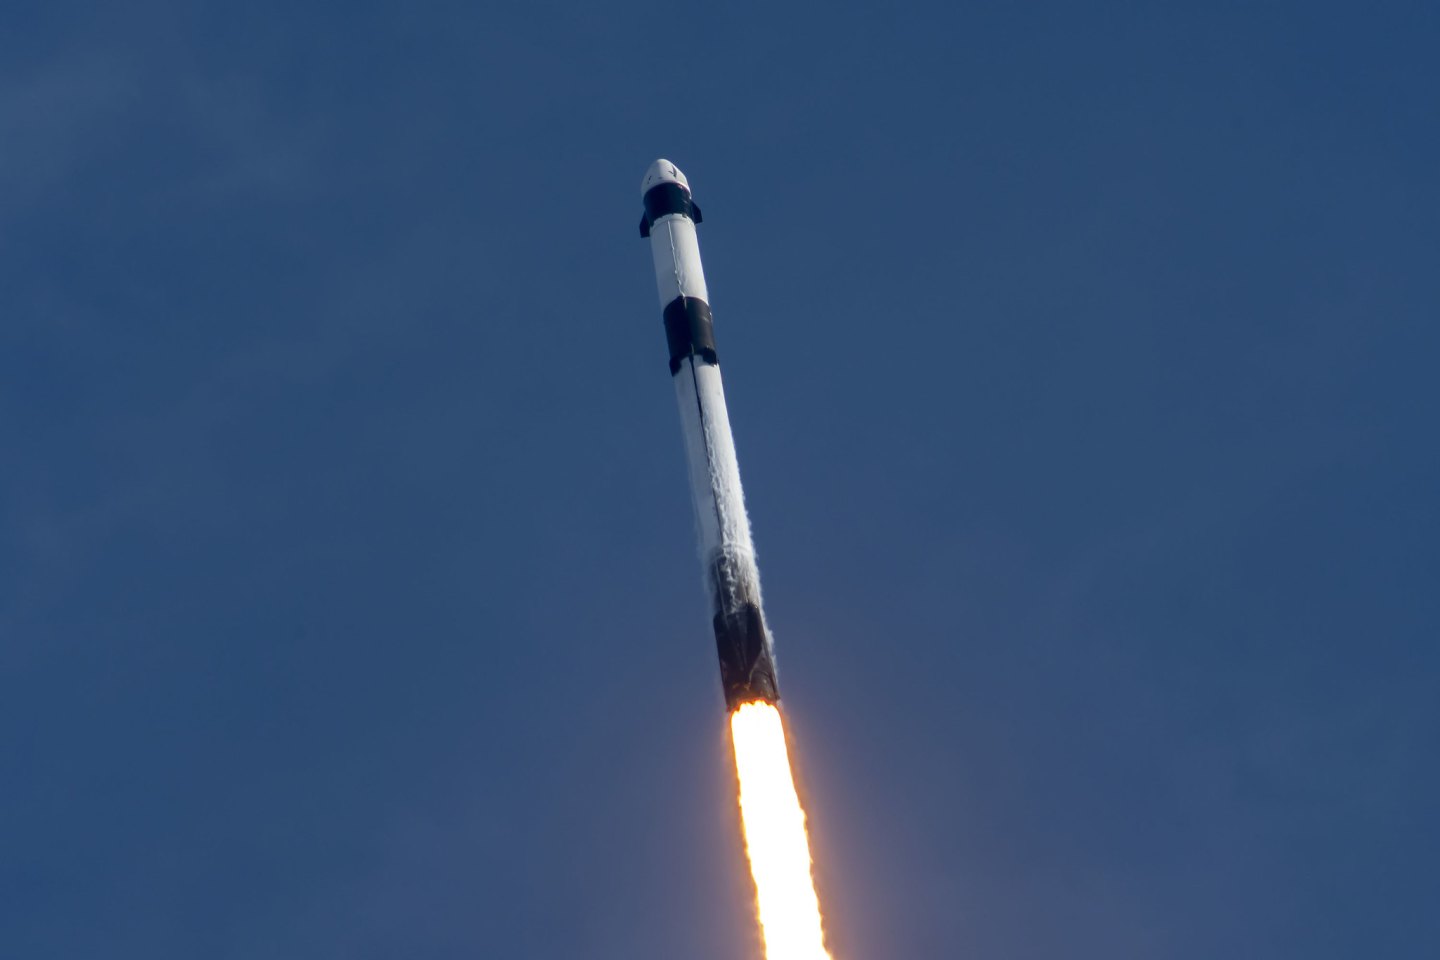 The new and improved Cargo Dragon capsule lifted off from NASA’s Kennedy Space Center on December 2